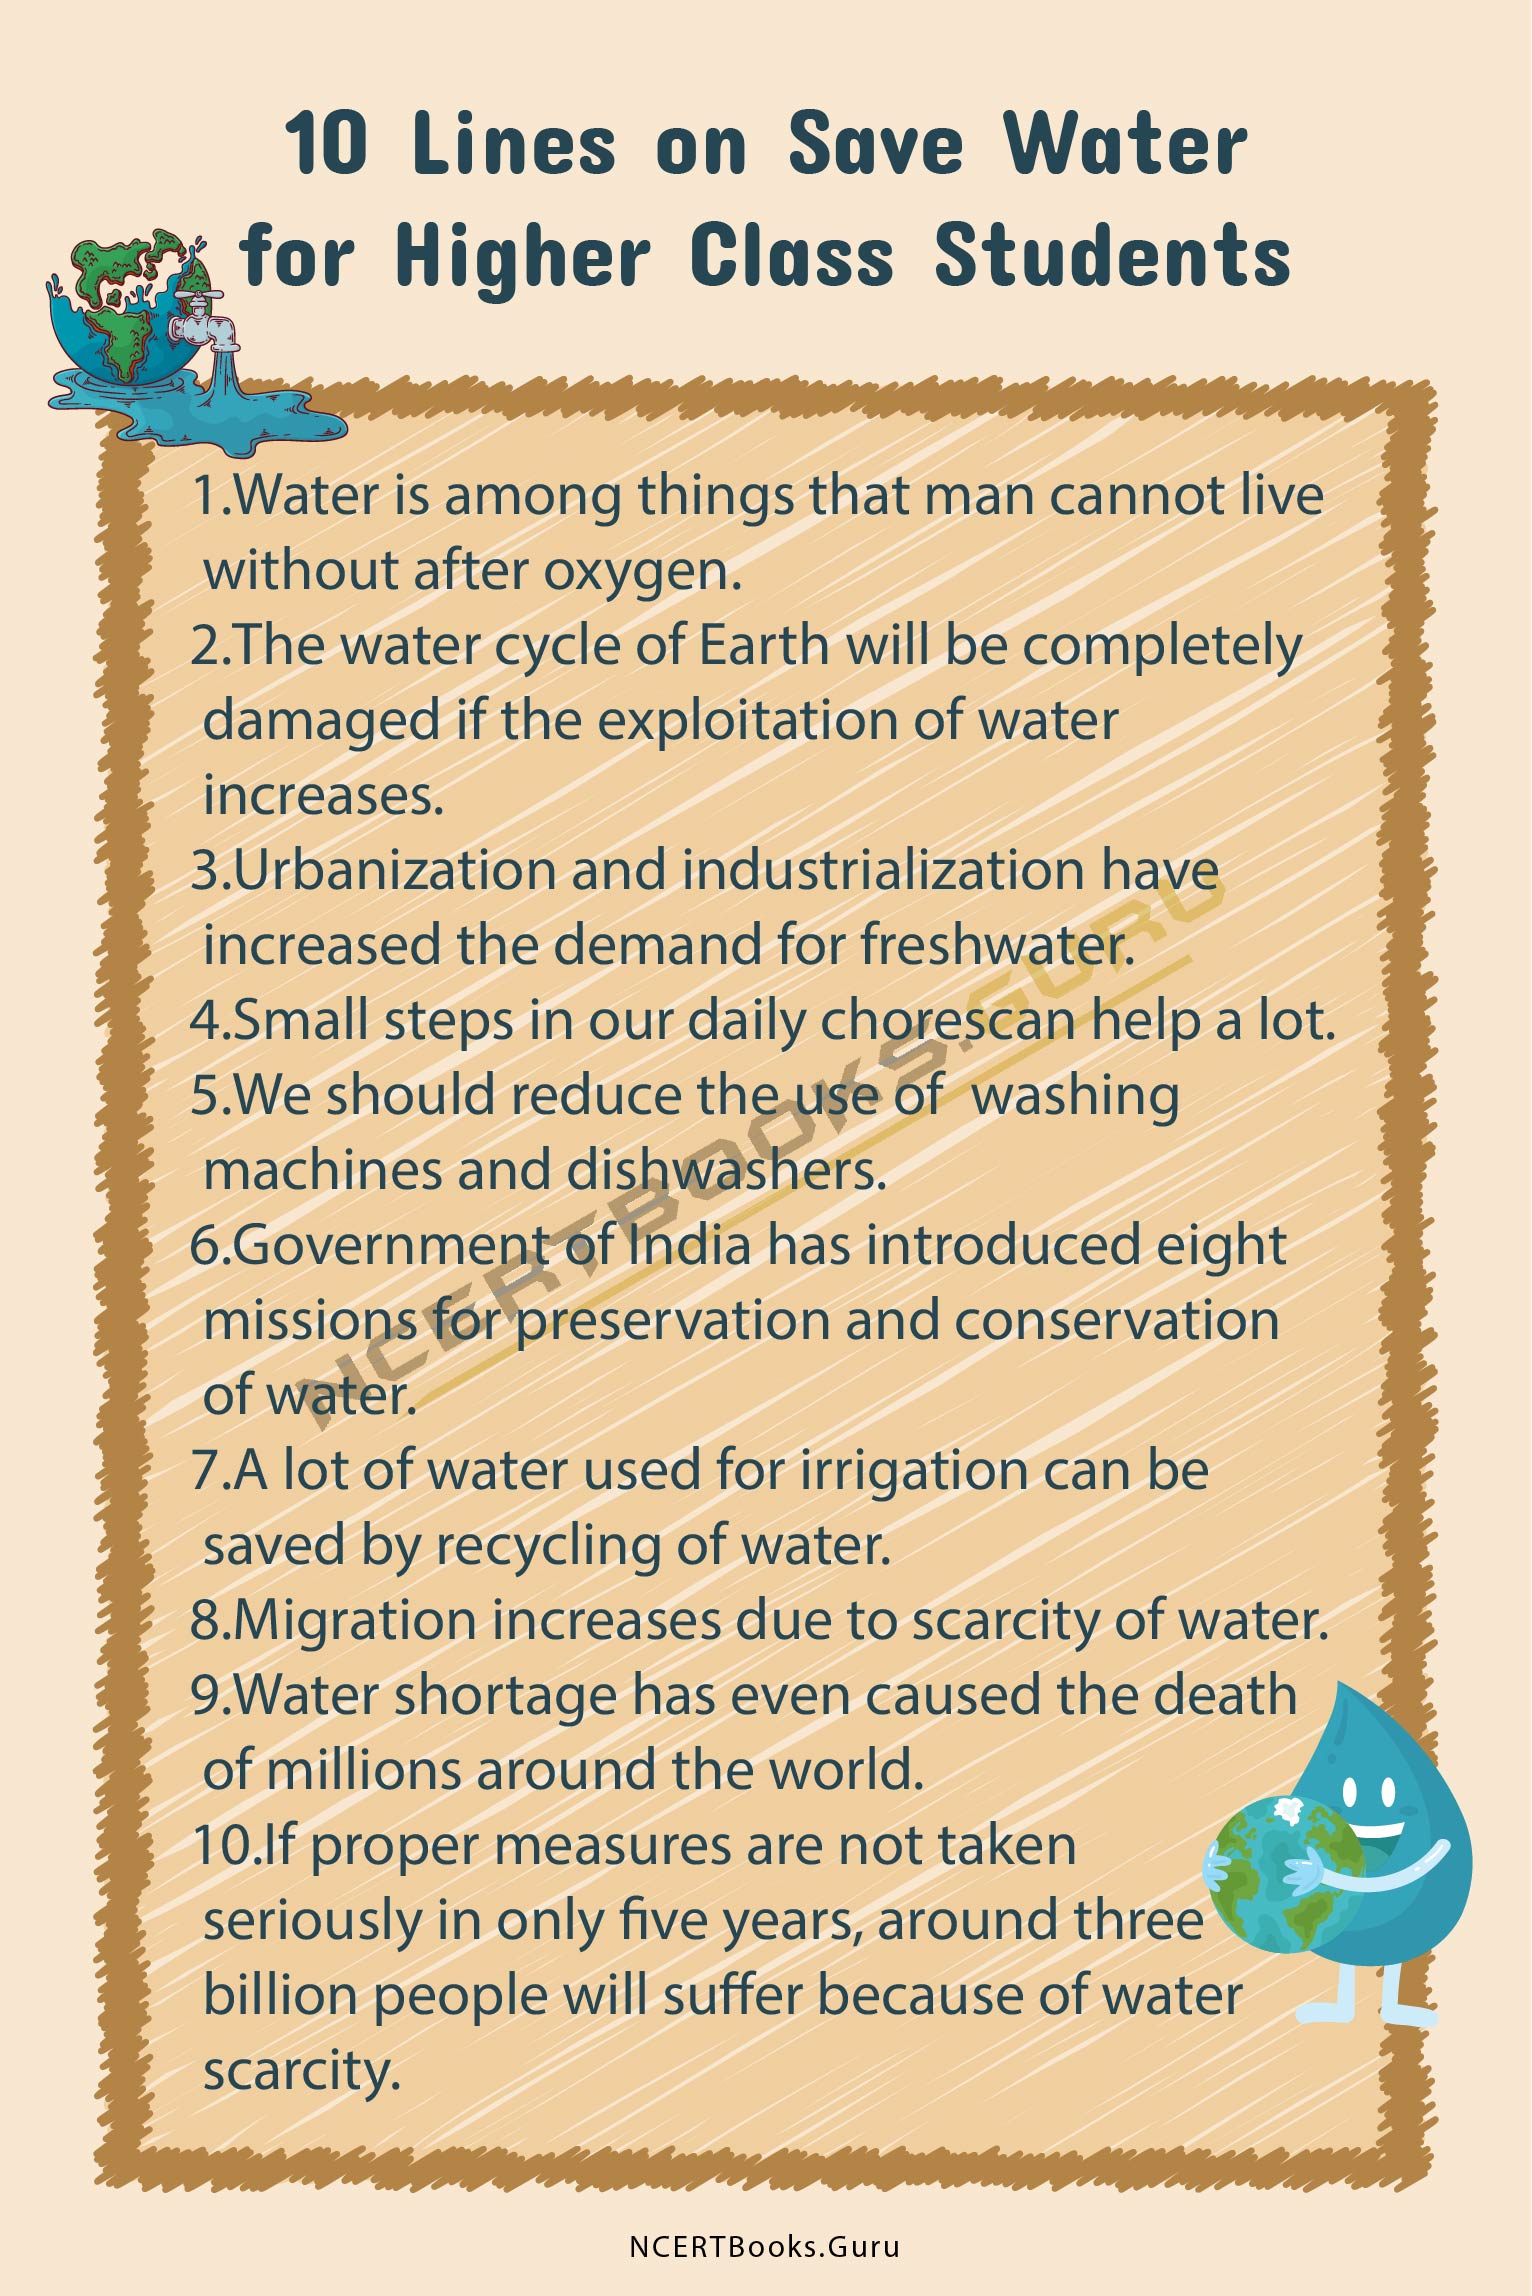 10 Lines on Save Water 2